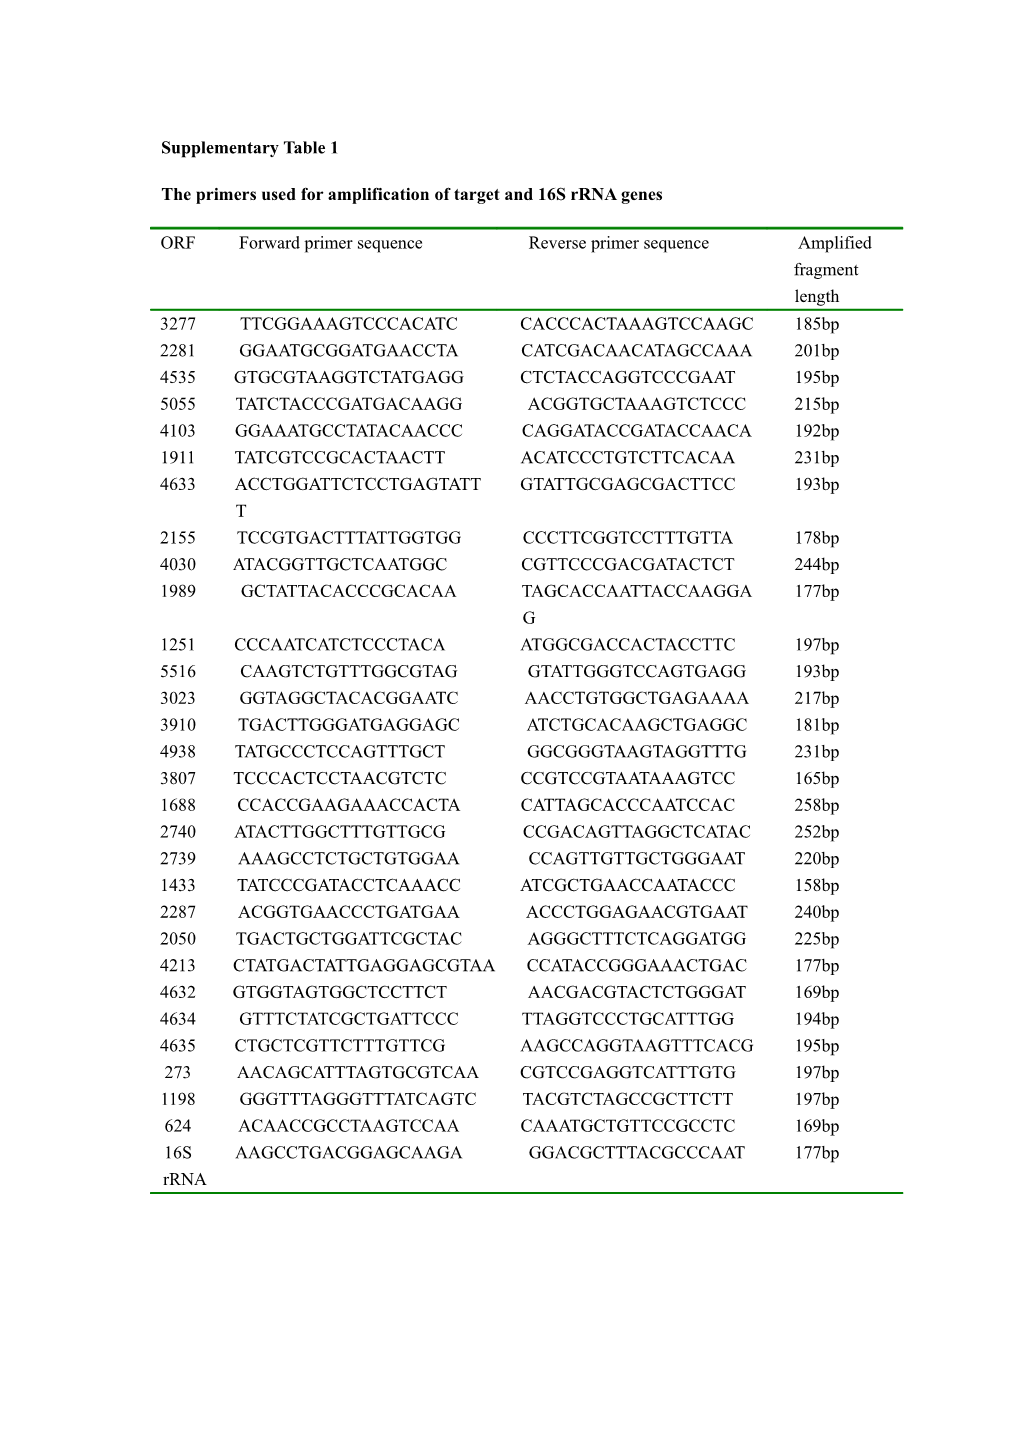 The Primers Used for Amplification of Target and 16S Rrna Genes